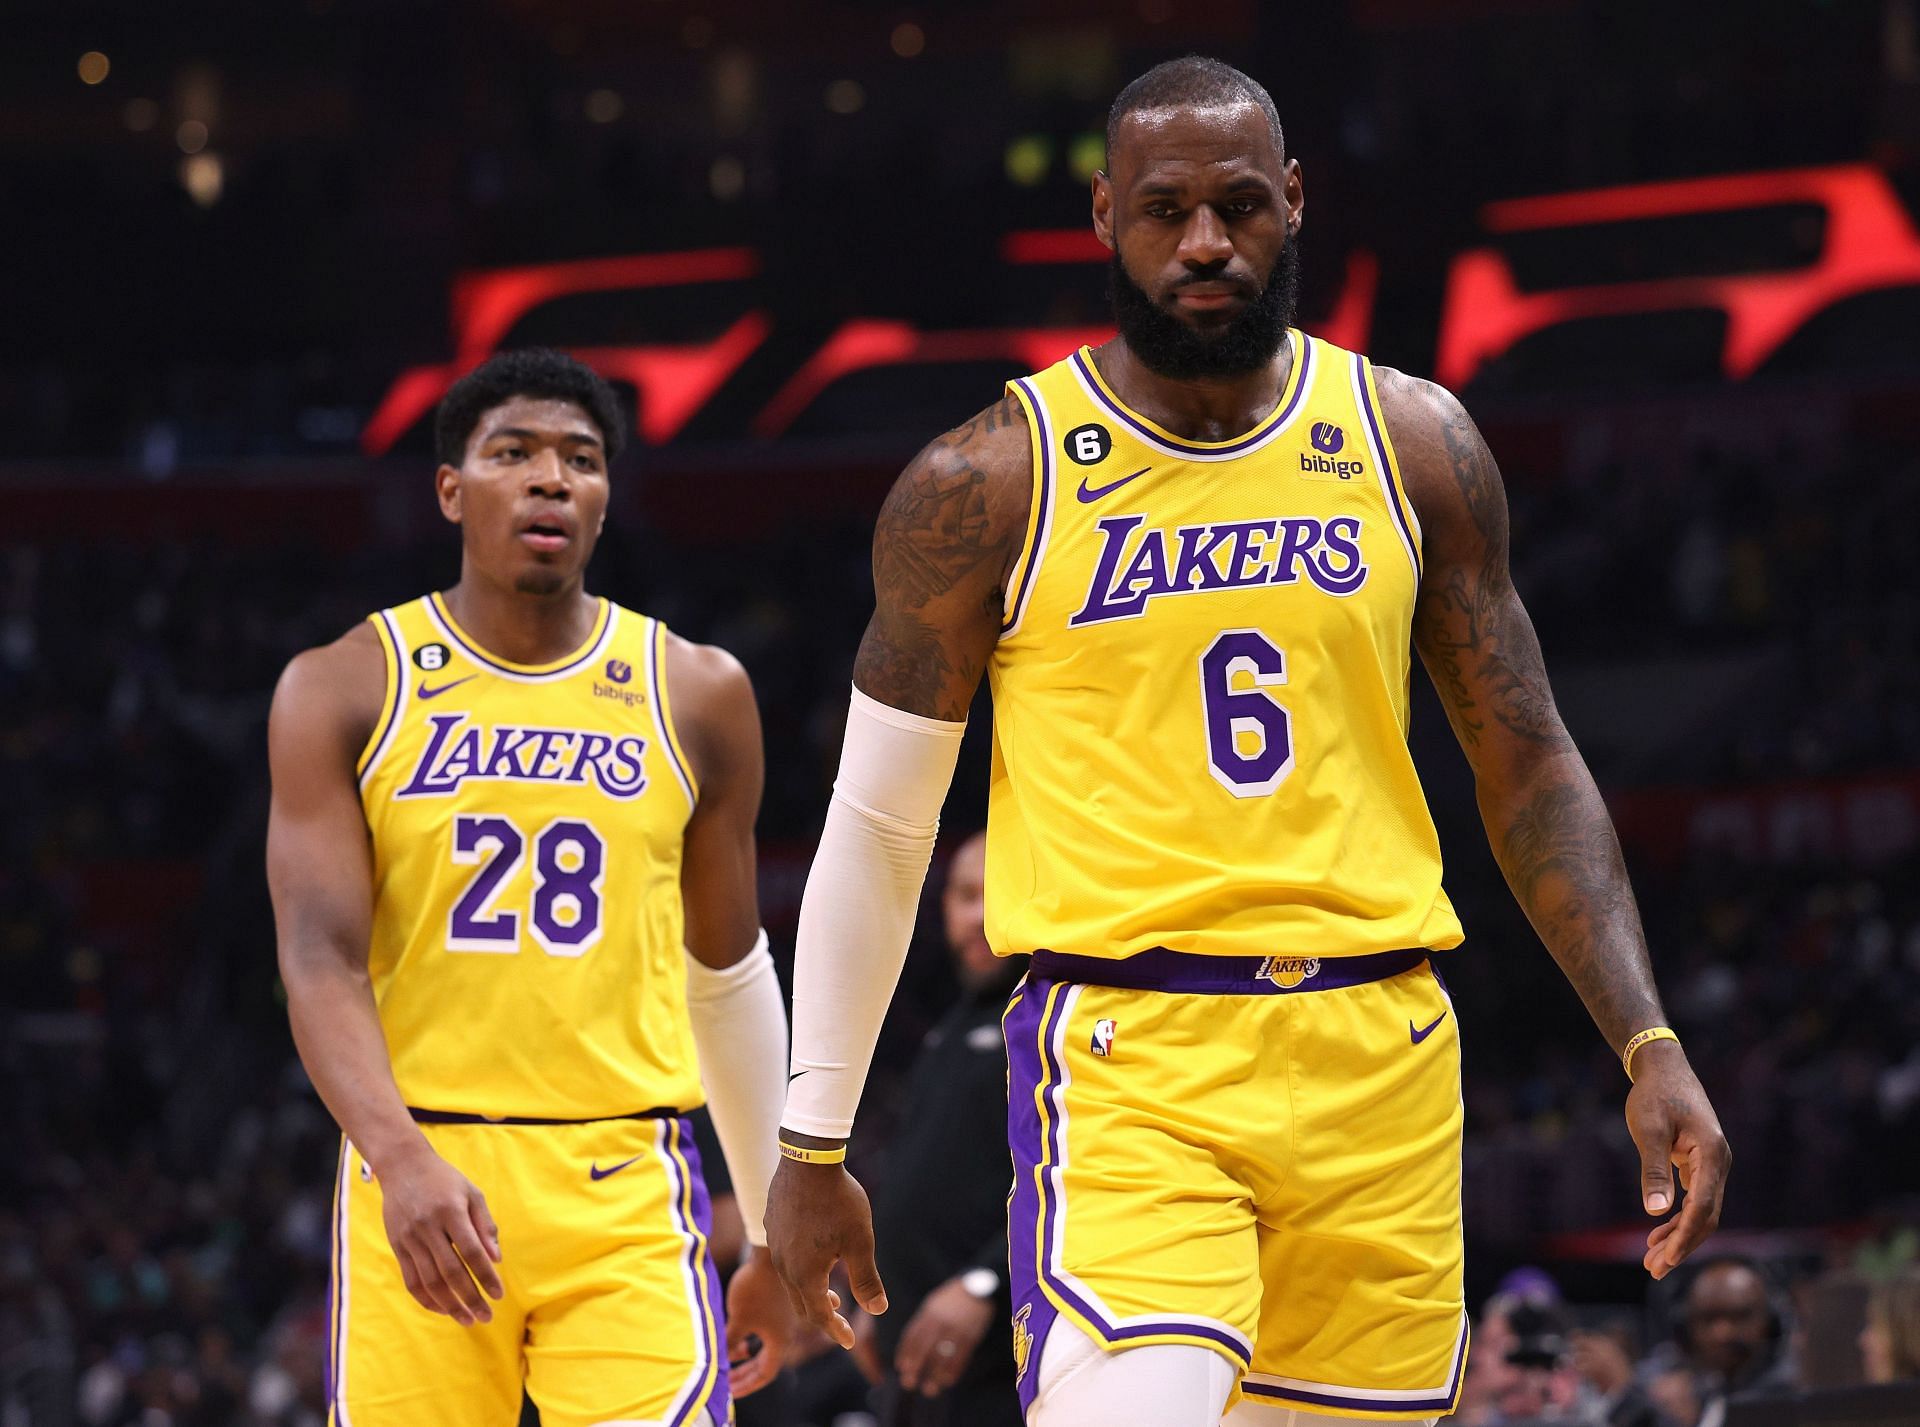 LeBron James and Rui Hachimura #6 of the LA Lakers against the LA Clippers